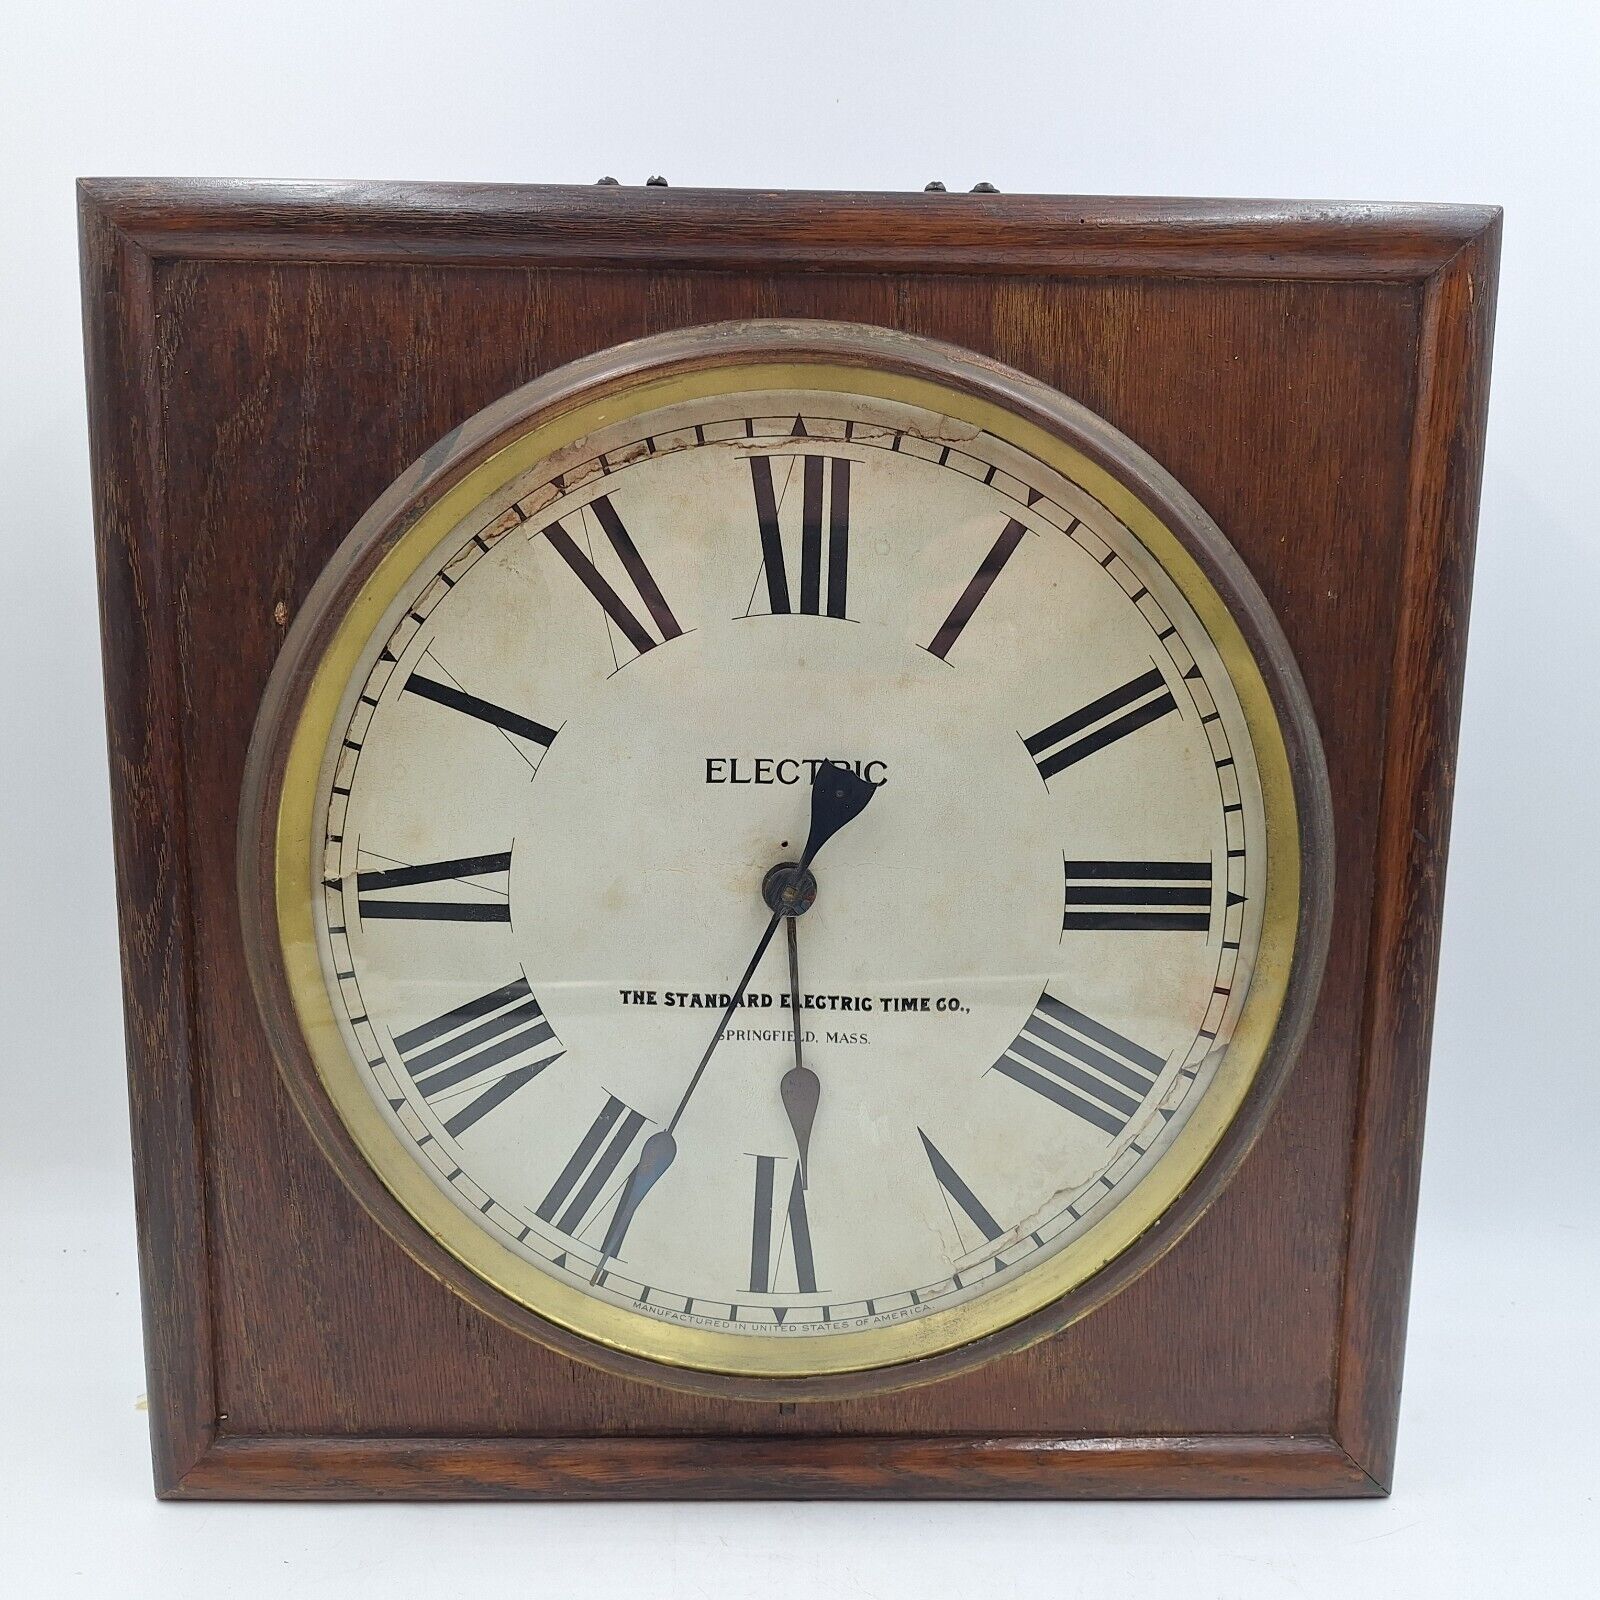 STANDARD ELECTRIC TIME INDUSTRIAL SQUARE WOODEN GALLERY CLOCK WITH GLASS